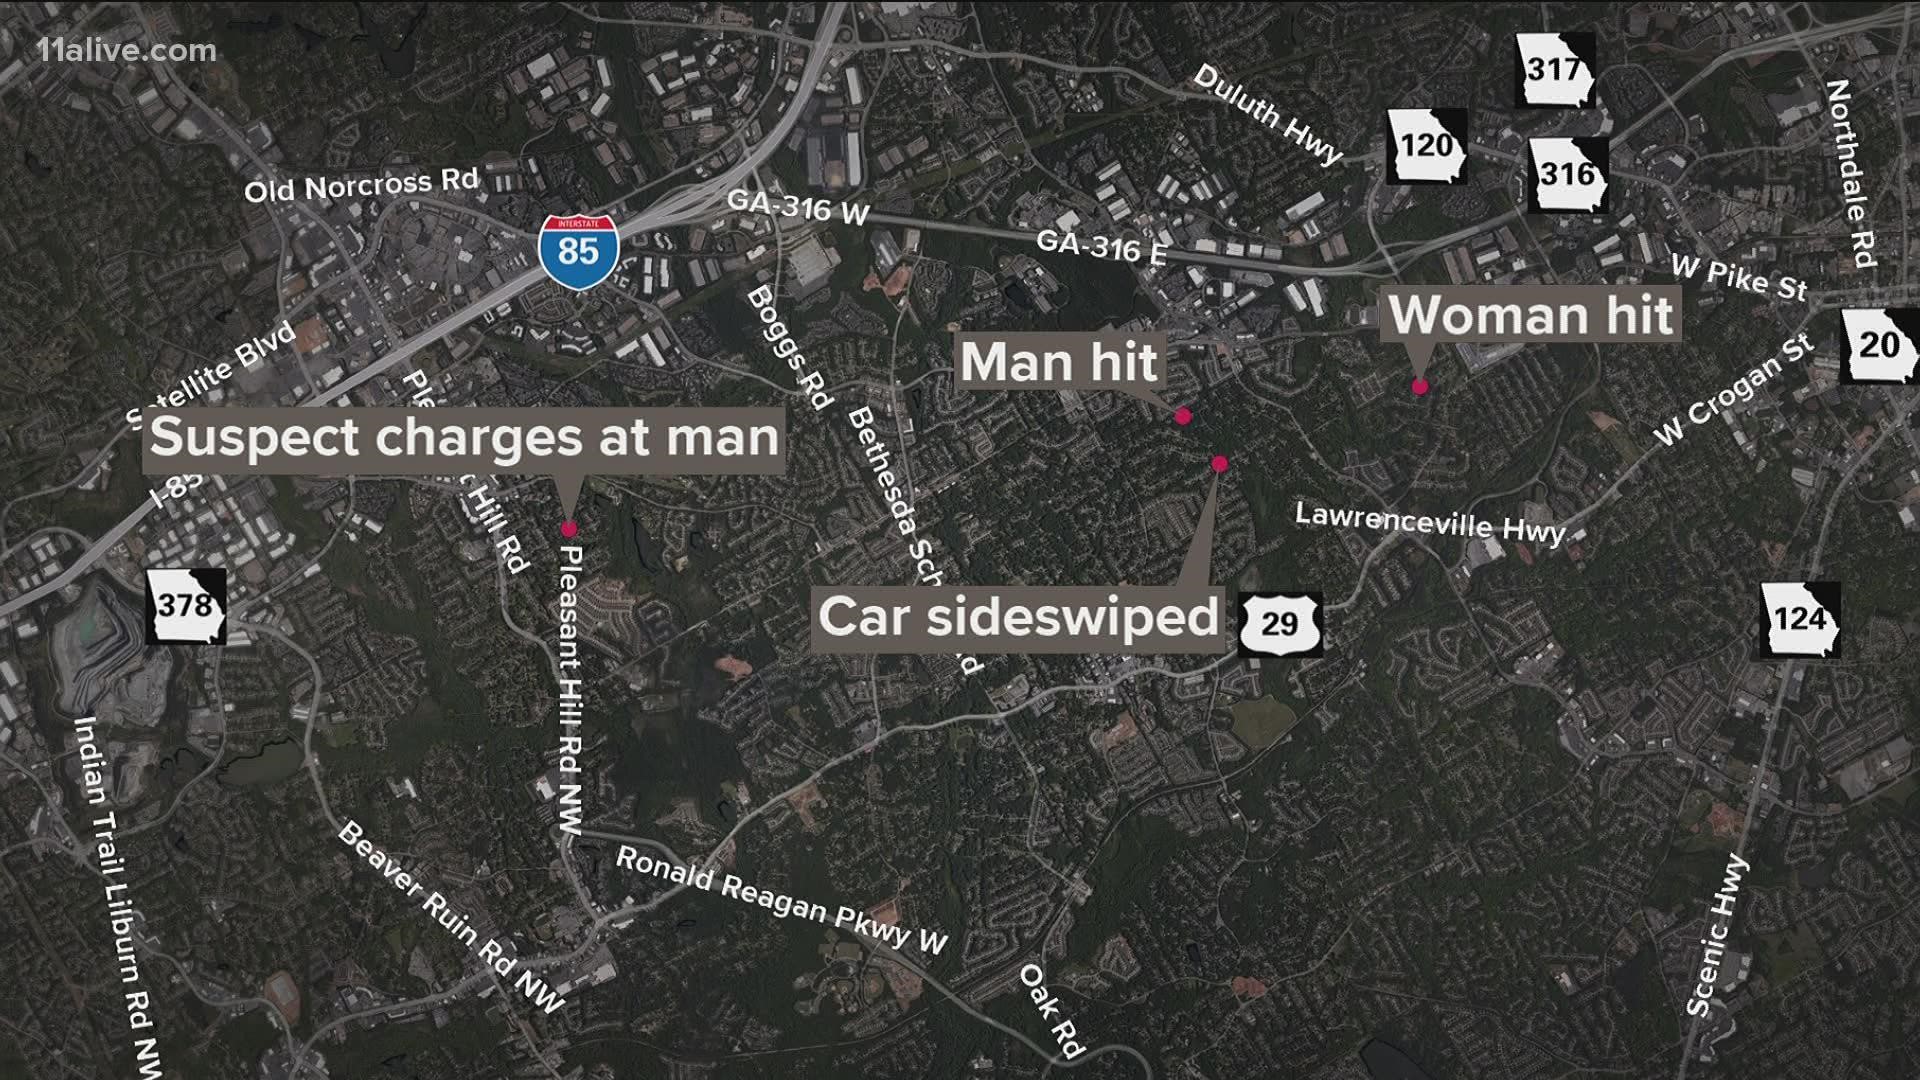 One man is charged with three hit-and-runs in Gwinnett County. All incidents occurred within minutes of each other.